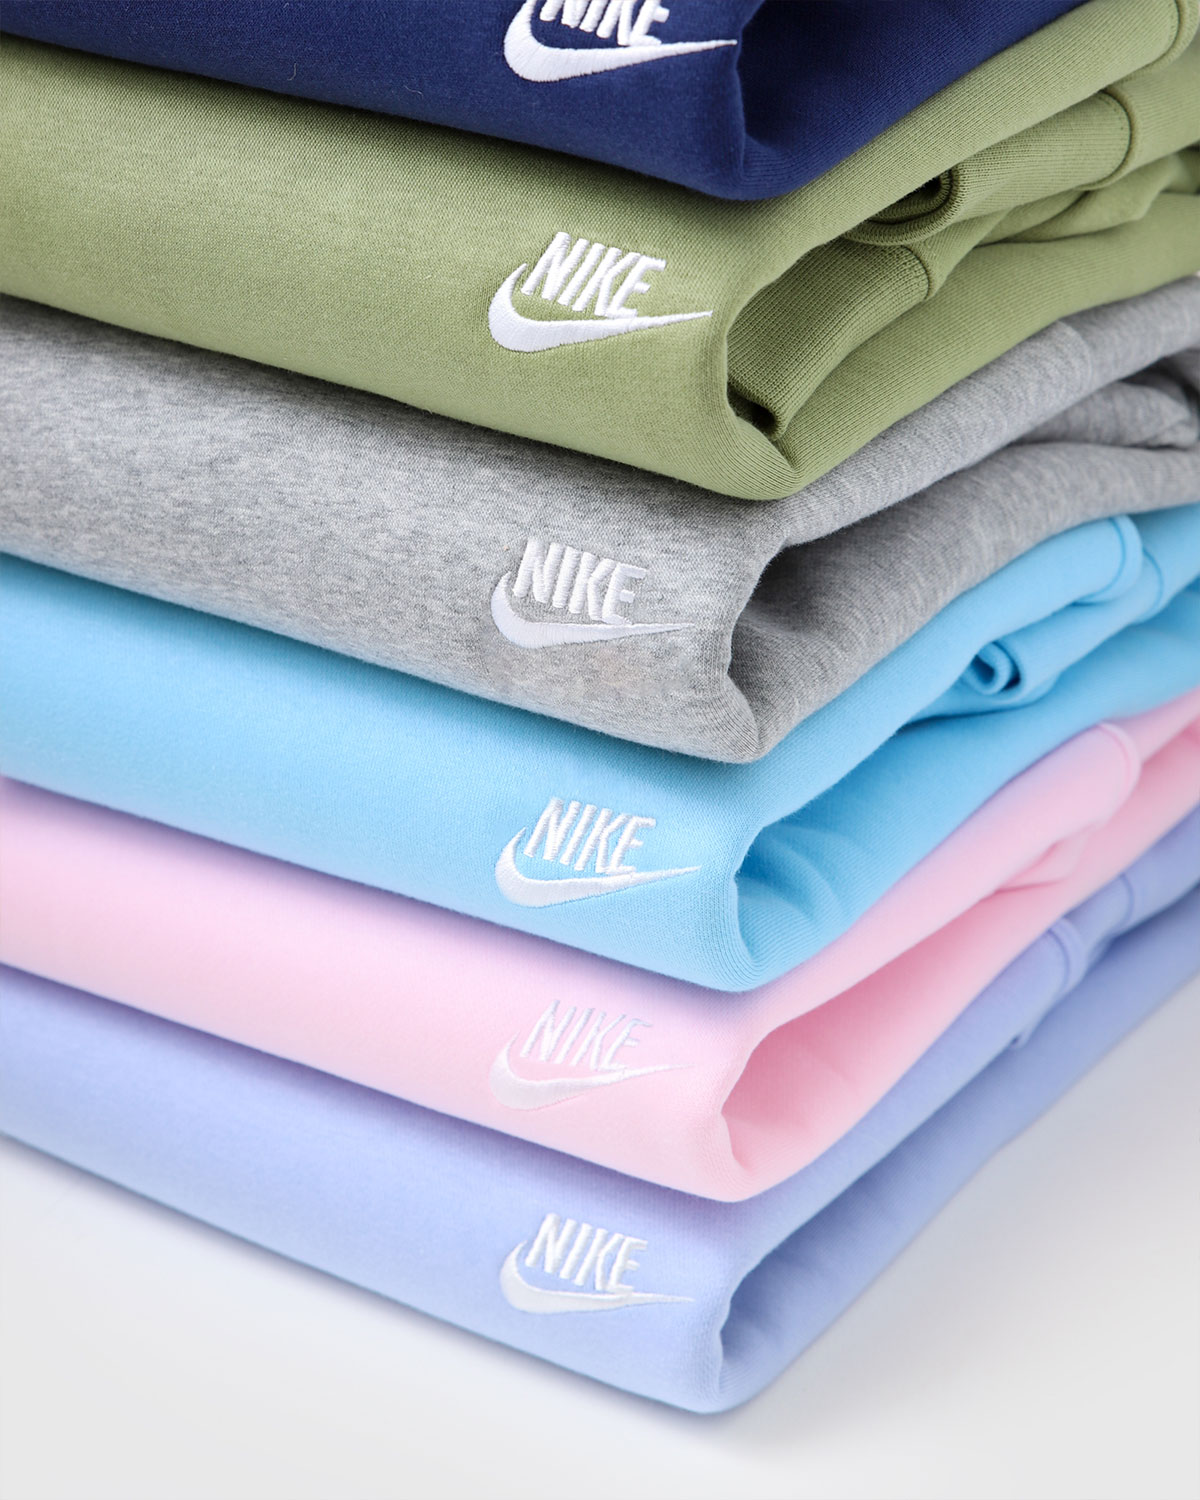 Shop the newest Nike styles